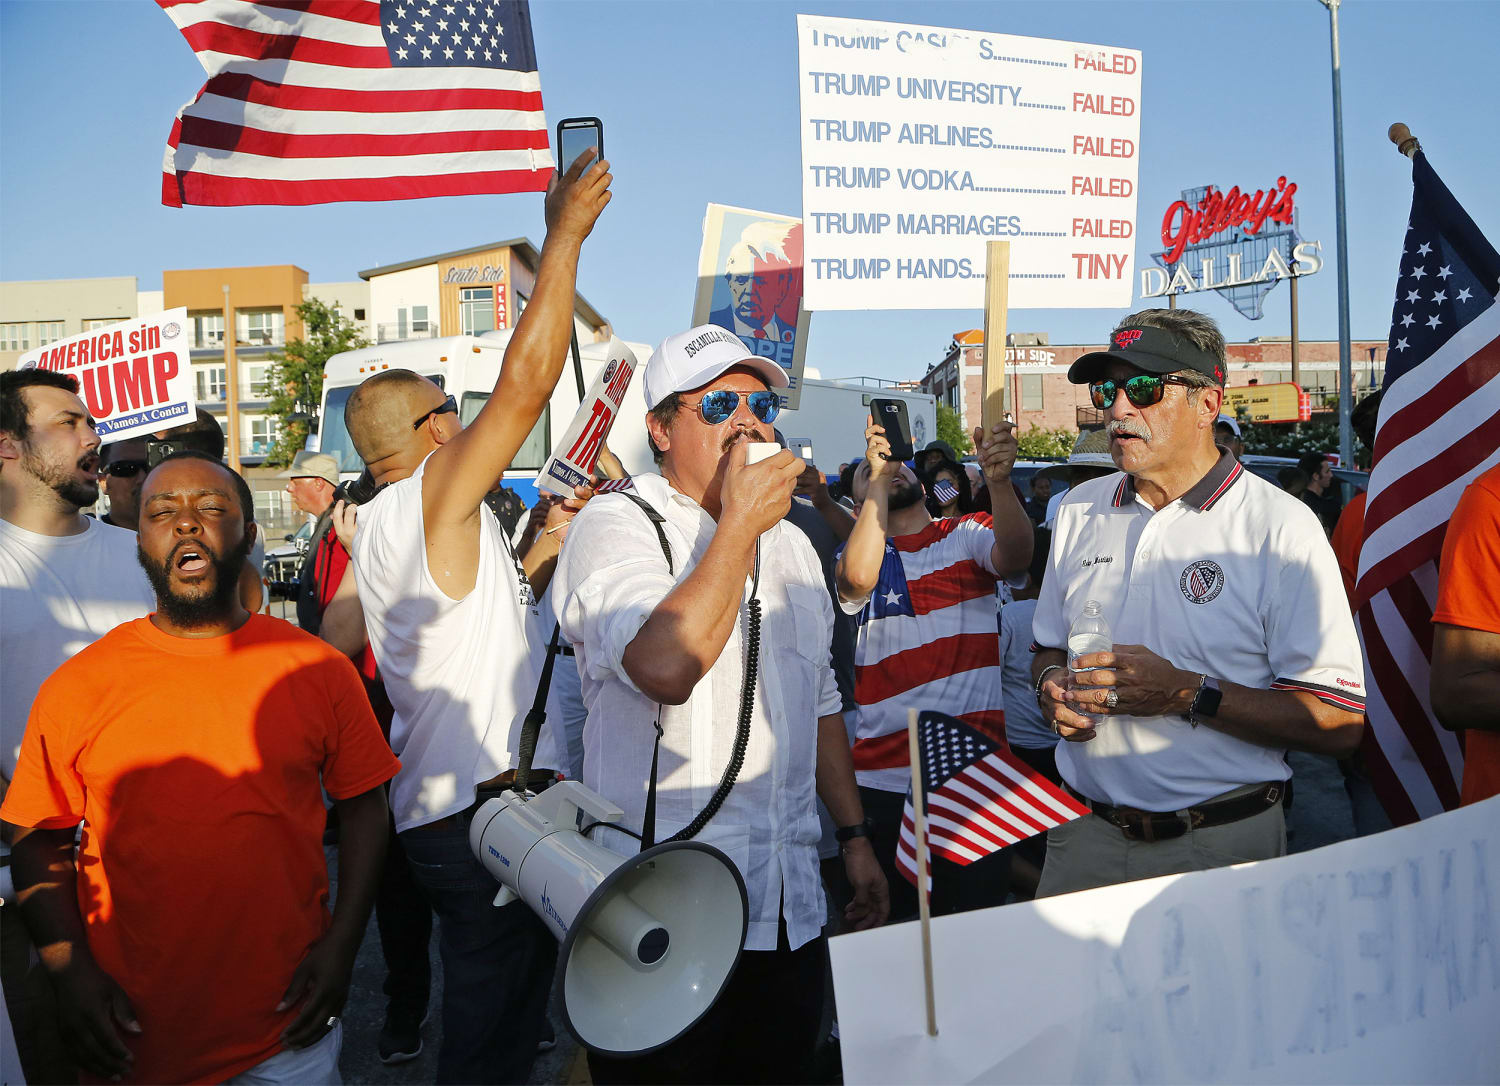 Puerto Rican statehood backers poised to take over oldest Latino